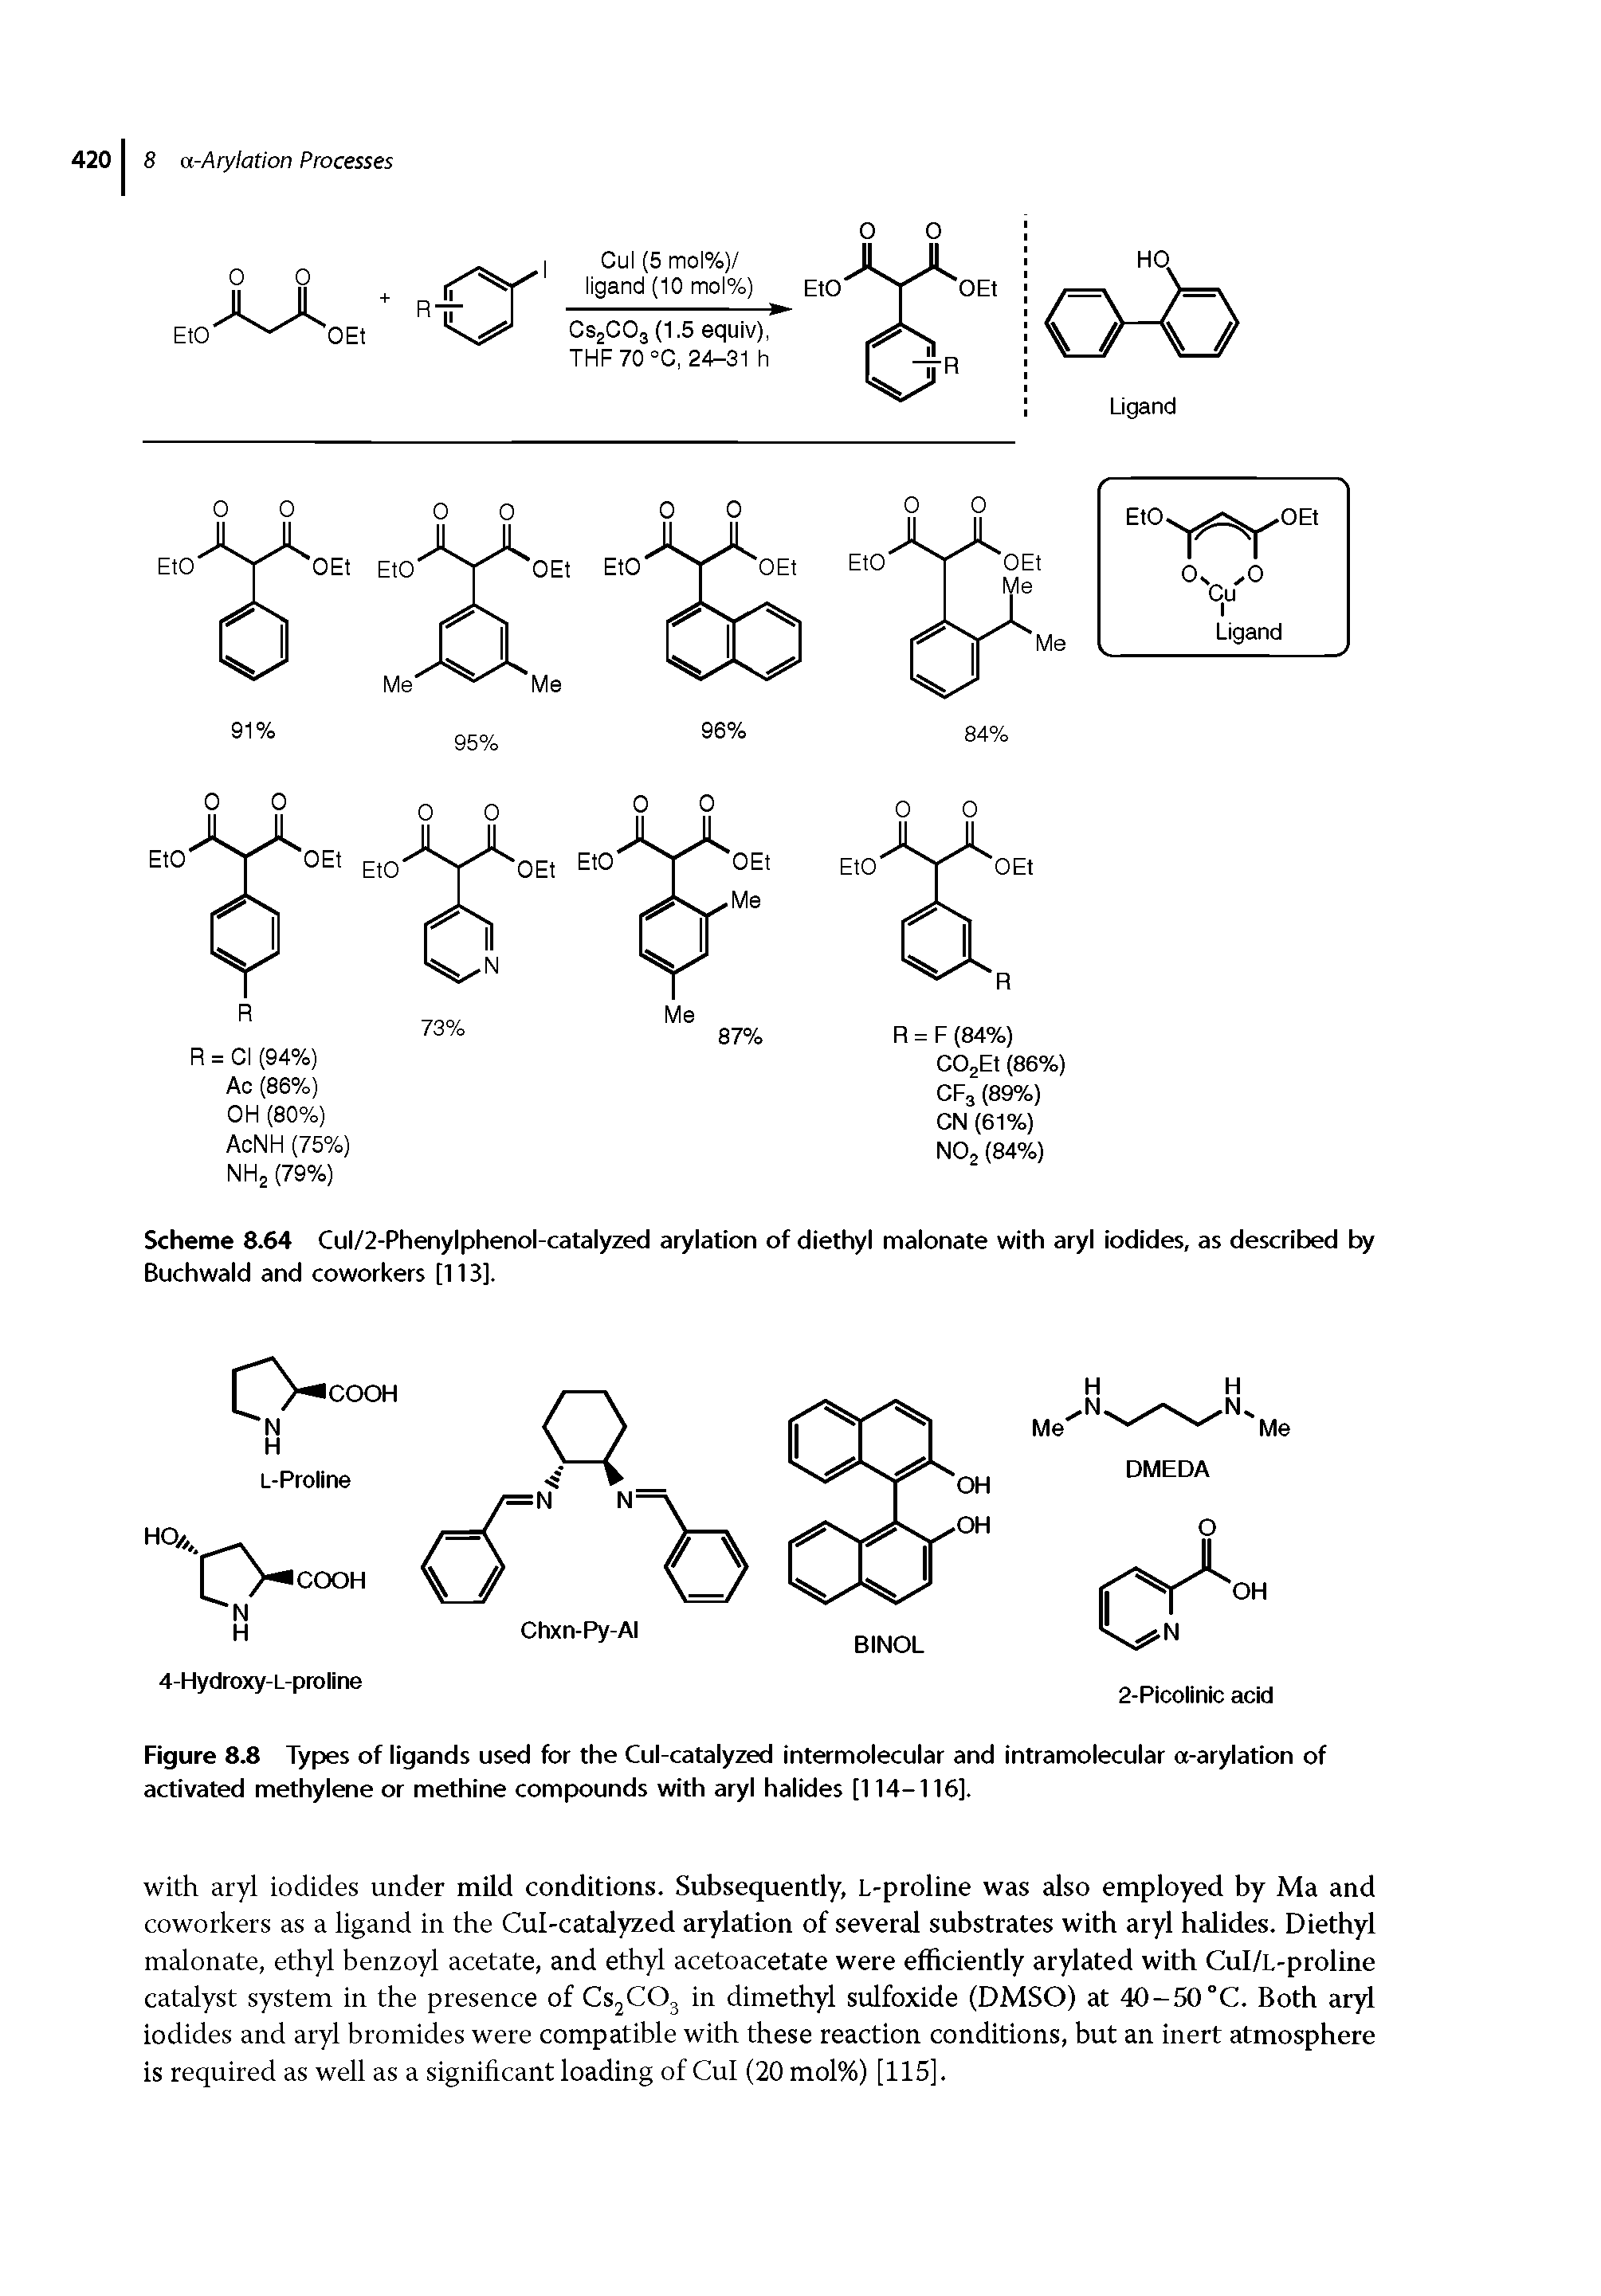 Figure 8.8 Types of ligands used for the Cul-catalyzed intermolecular and intramolecular a-arylation of activated methylene or methine compounds with aryl halides [114-116].